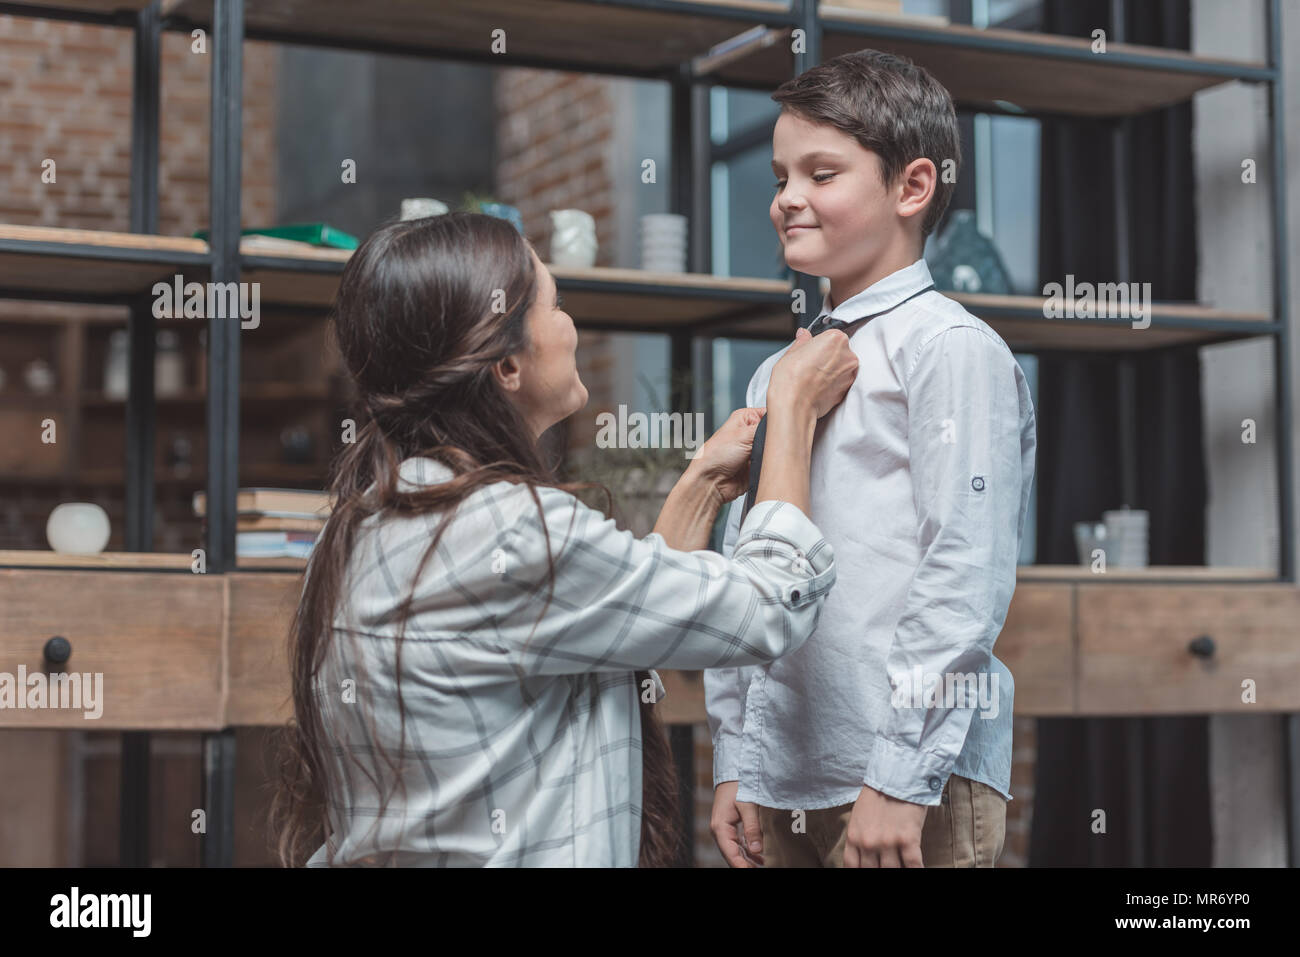 Mother Helping Son With Tie High Resolution Stock Photography and Images -  Alamy